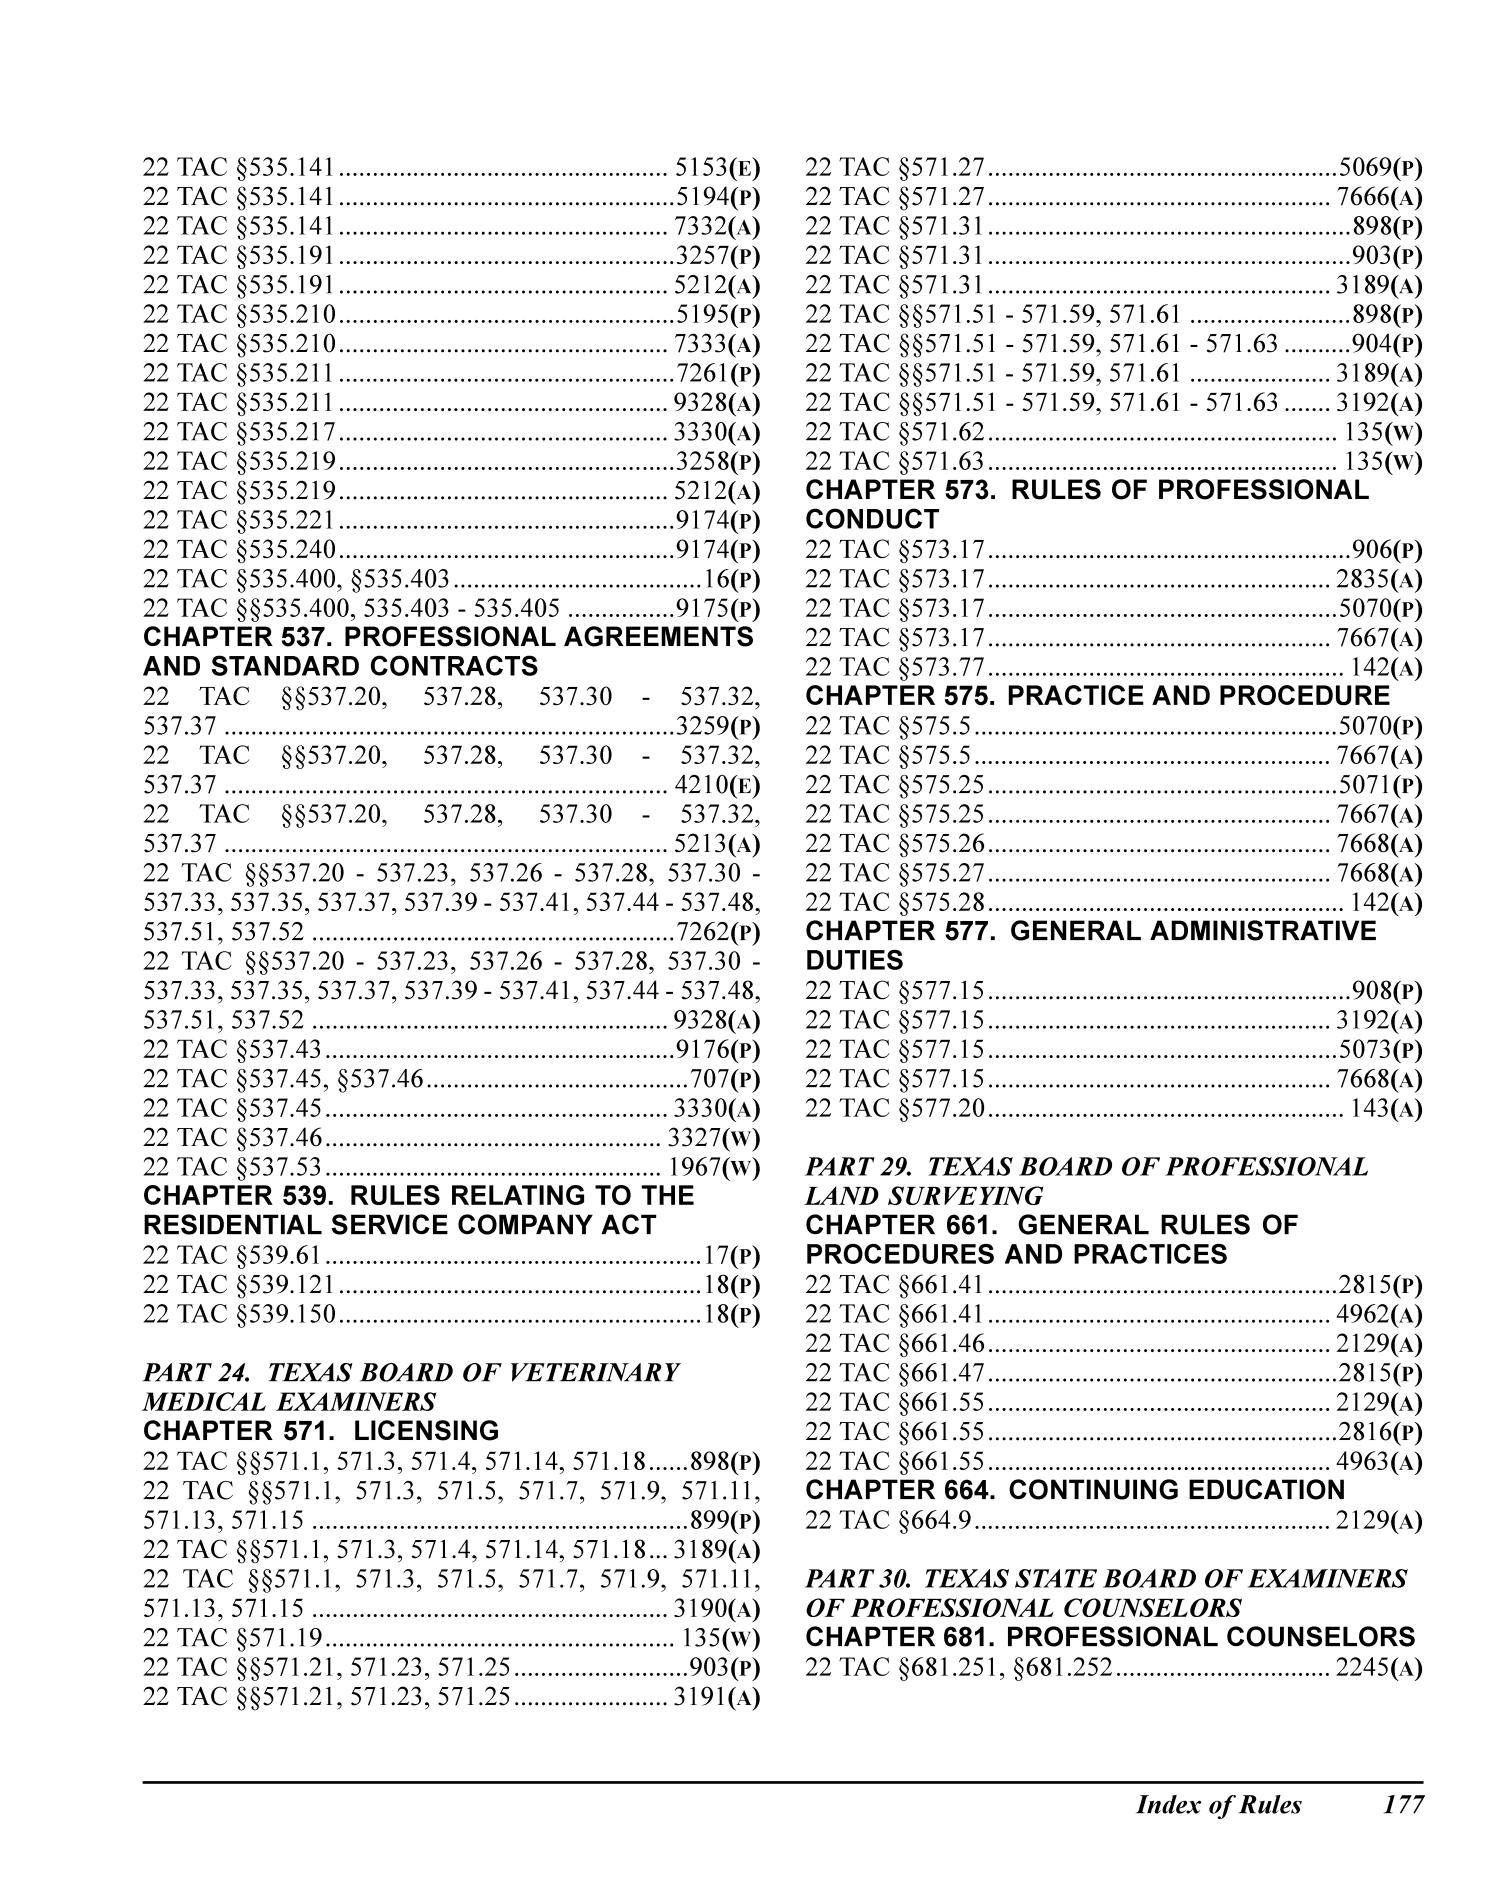 Texas Register: Annual Index January 1 - December 30, 2011, Index of Rules, Pages 153-200.
                                                
                                                    177
                                                